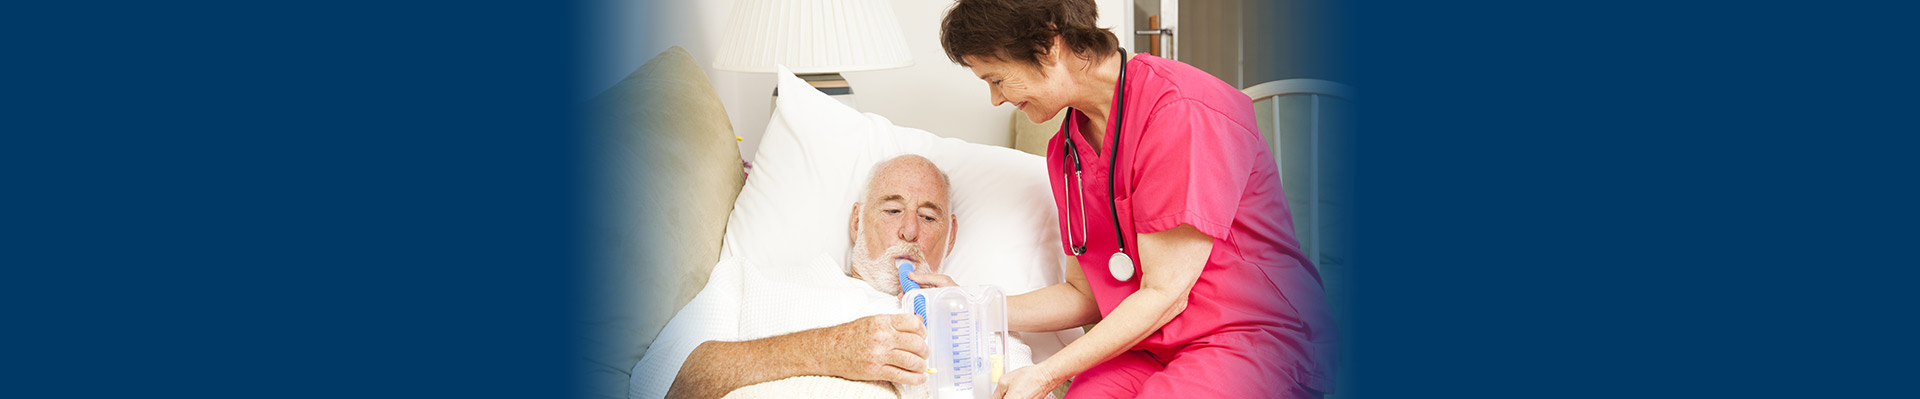 Banner picture of a male patient lying down on a couch doing Respiratory Therapy. A female Respiratory Therapist is holding a tube up to his mouth as he blows into a Incentive Spirometer,

Respiratory Therapy